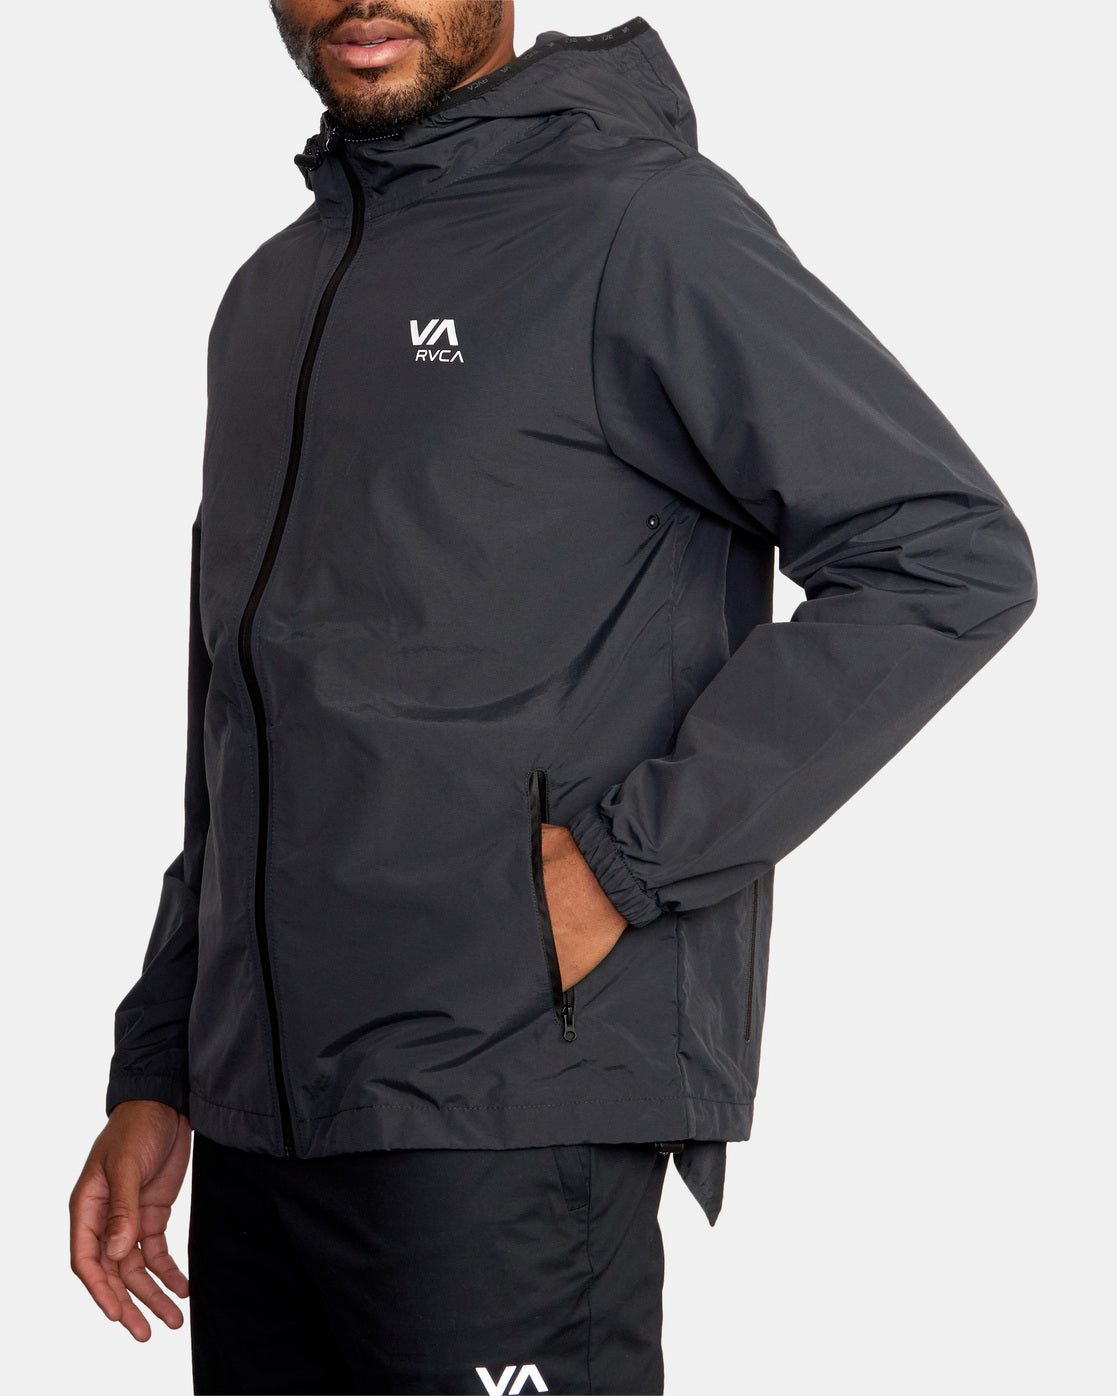 Rvca Outsider Packable Jacket Black